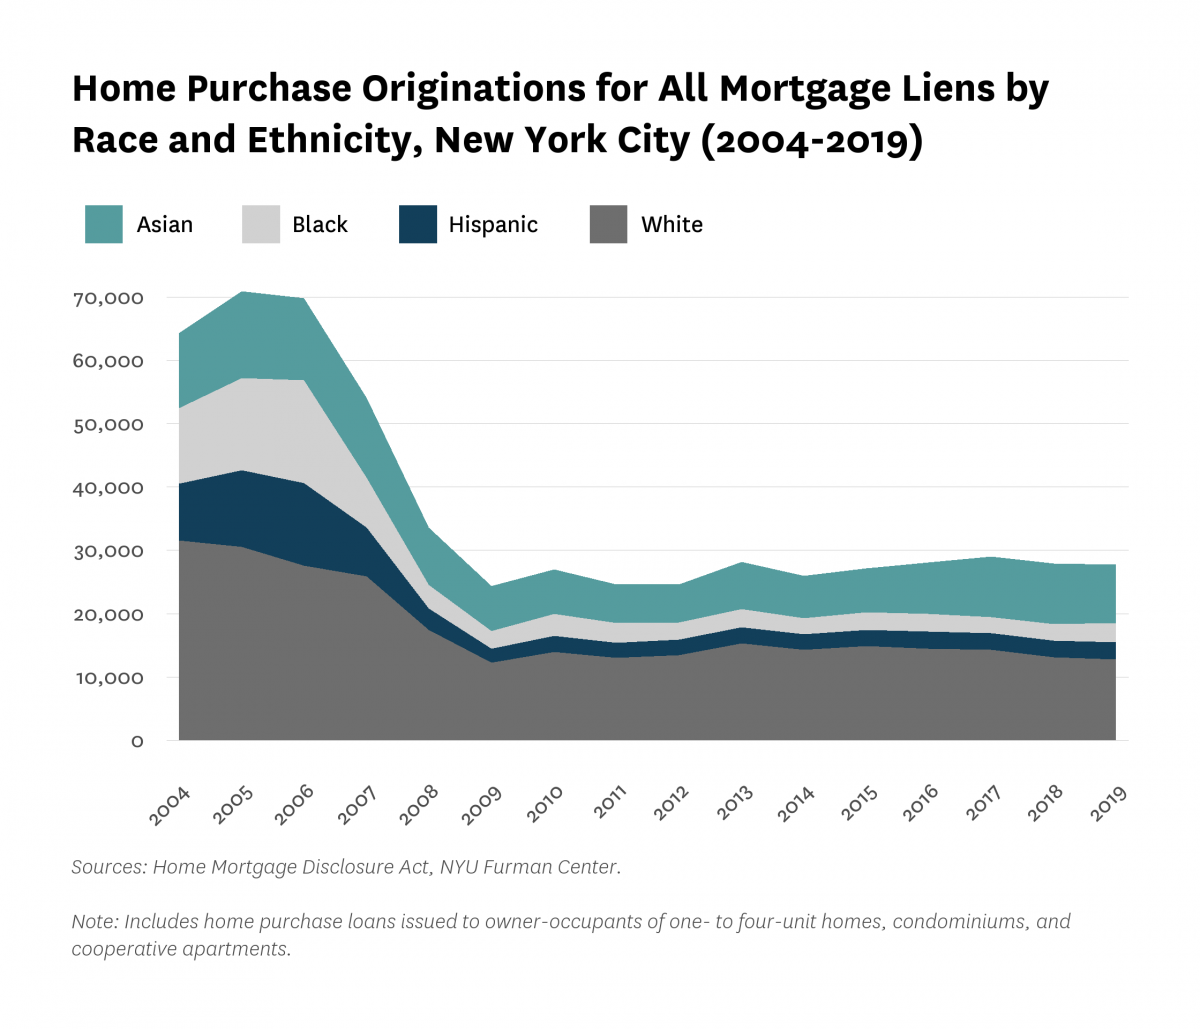 Area chart showing home purchase originations for all mortgage liens by race and ethnicity in New York City from 2004 to 2019.